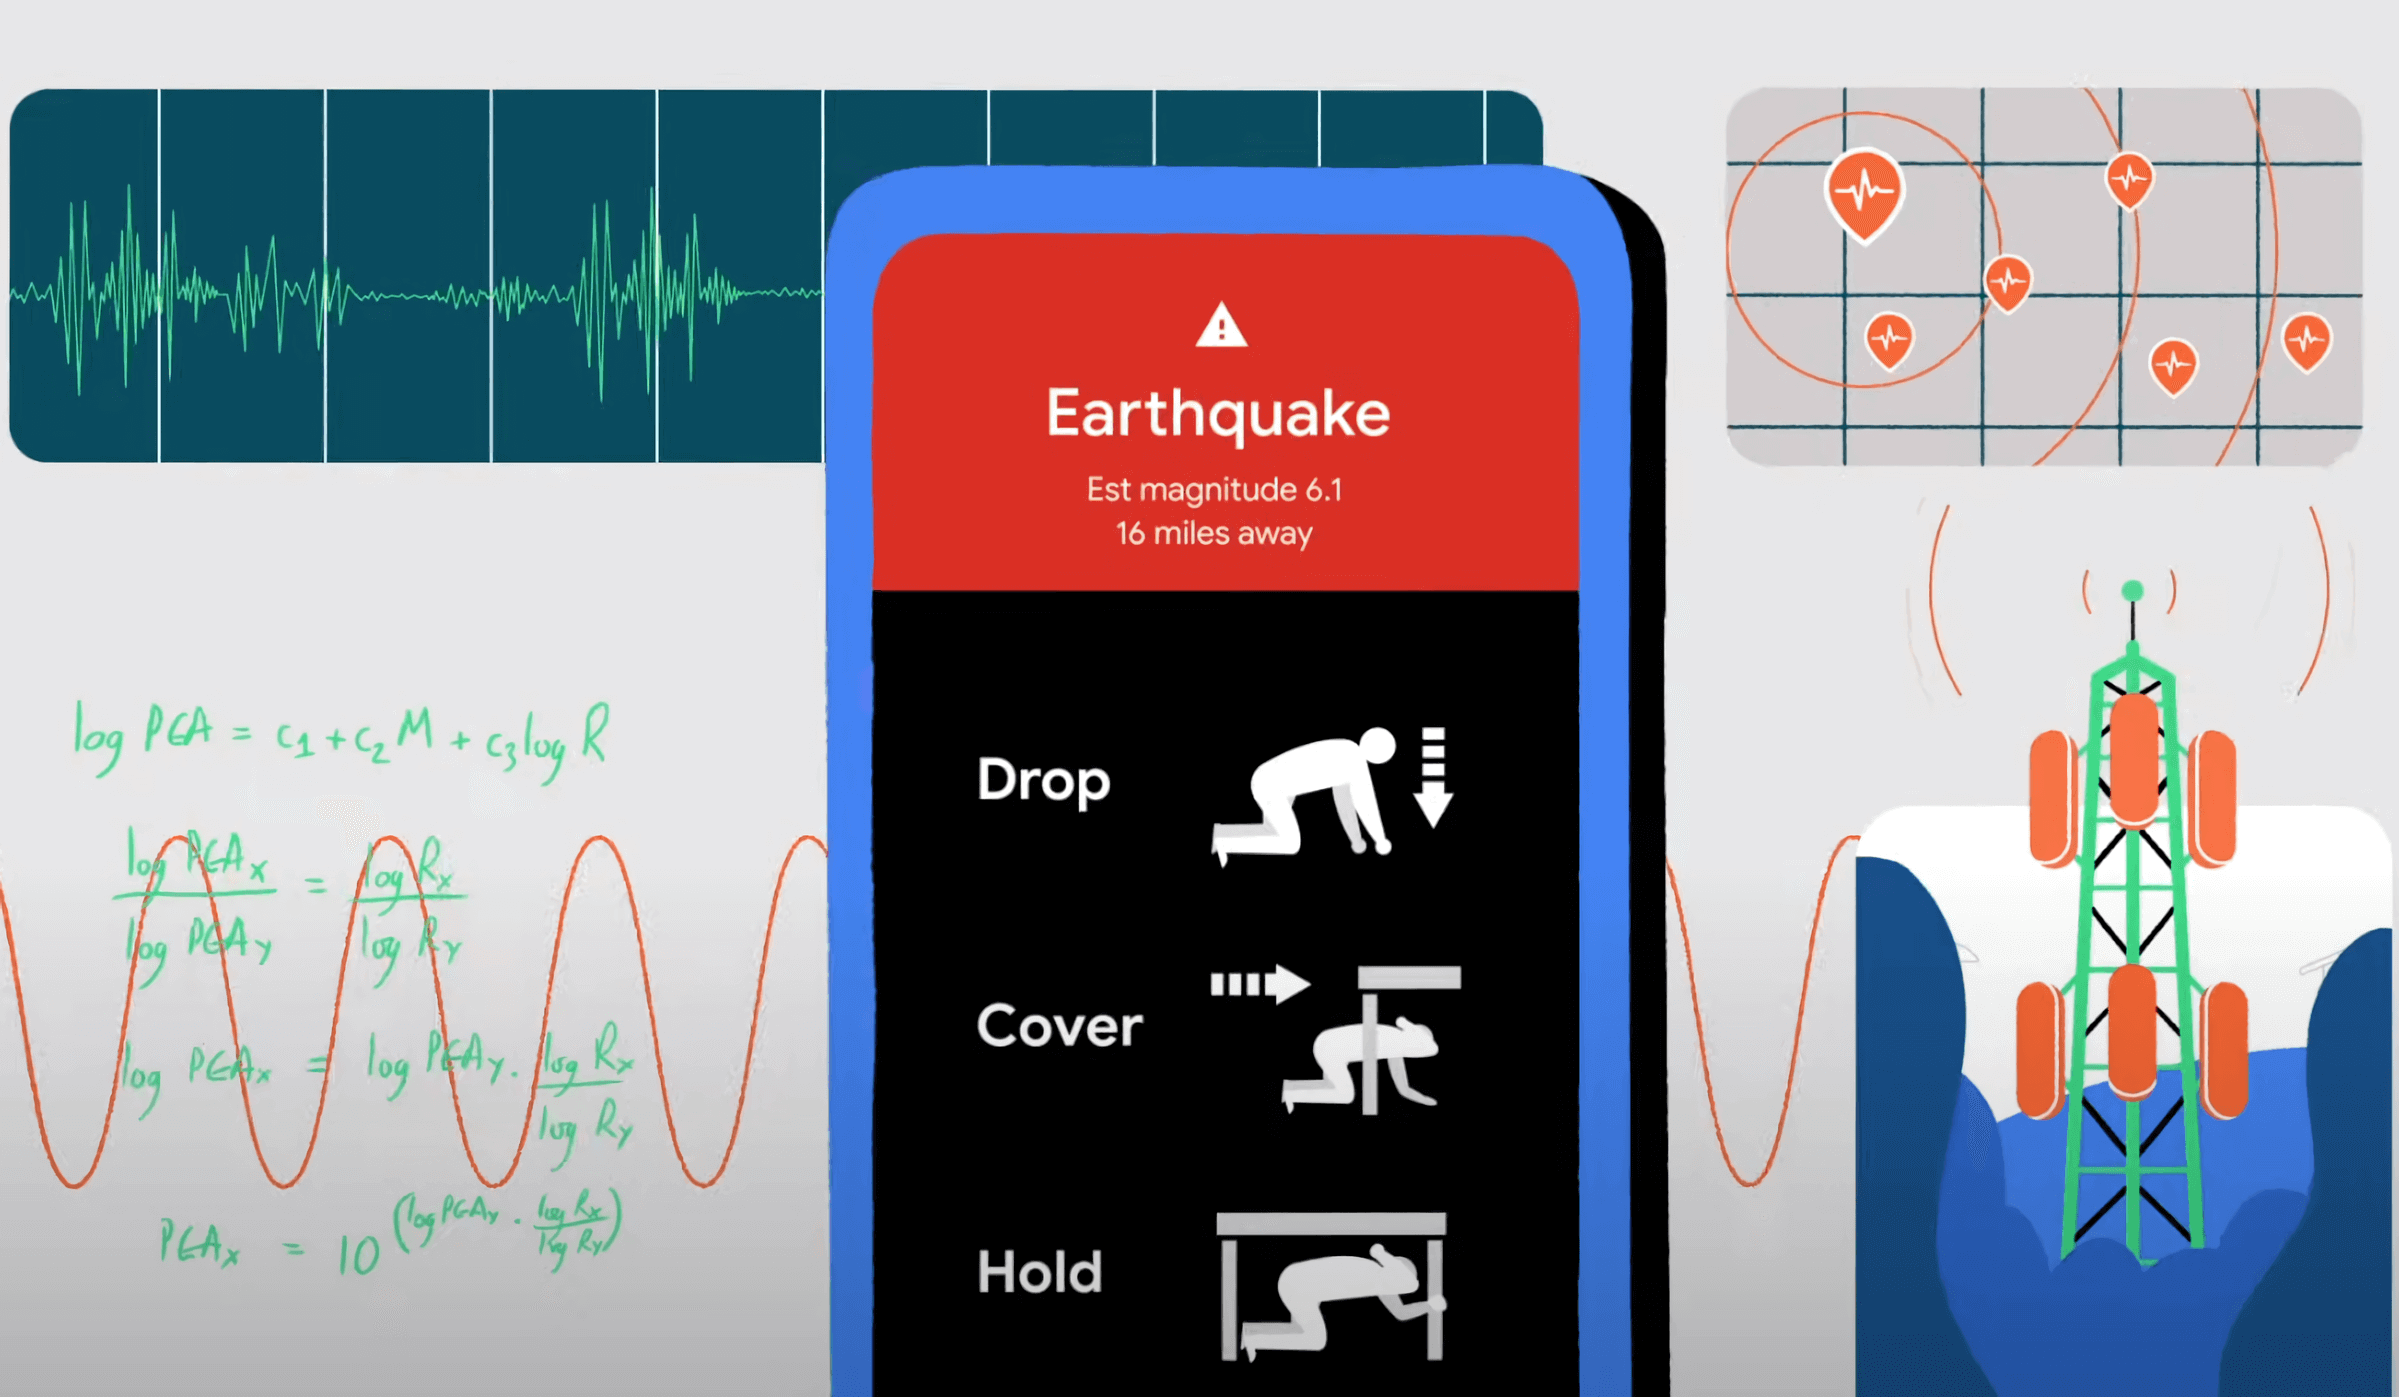 Google will use Android smartphones as earthquake detection devices